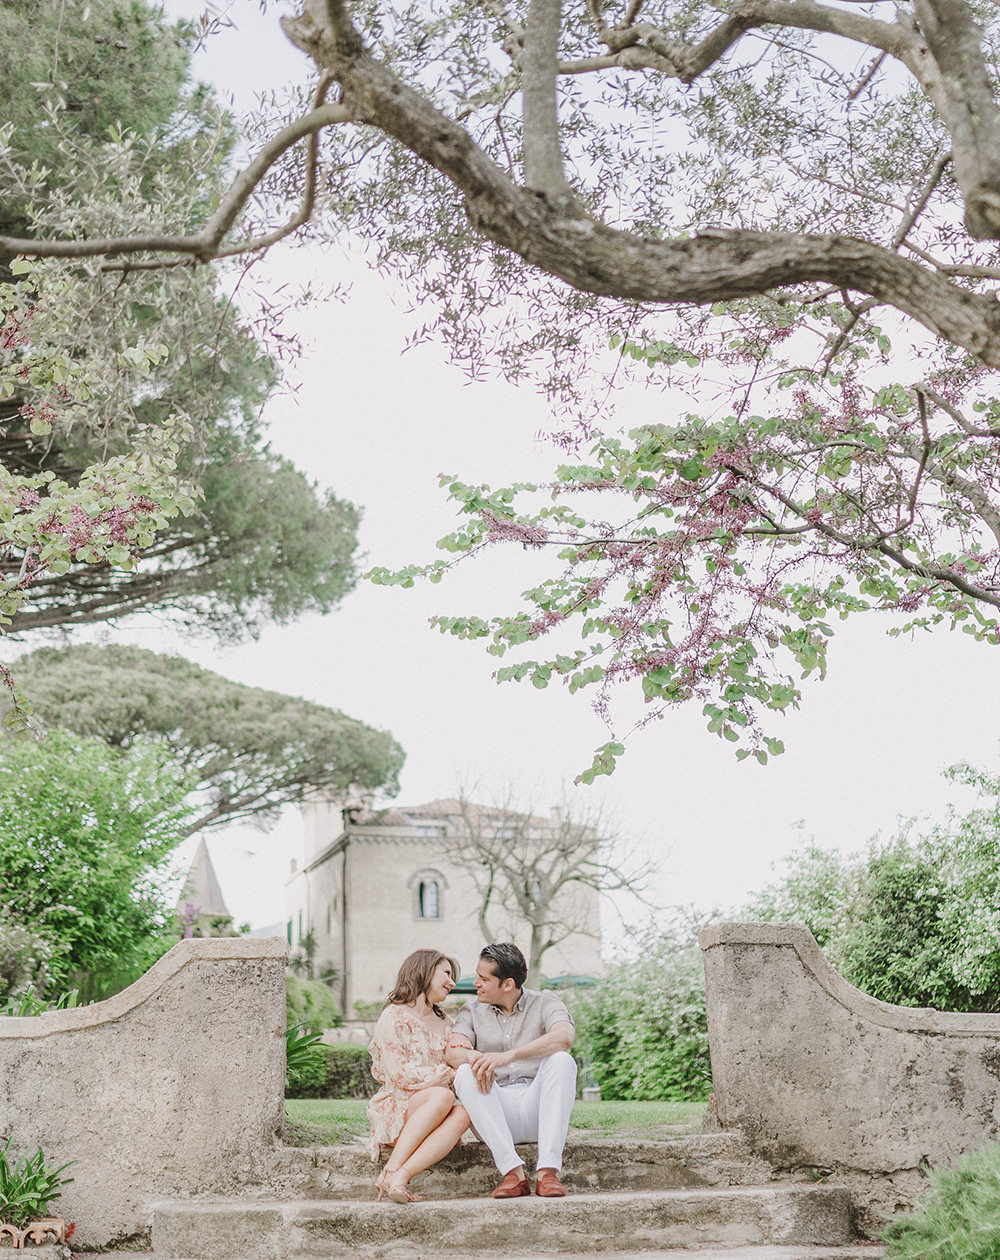 Don’t know how to start planning your wedding in Italy?